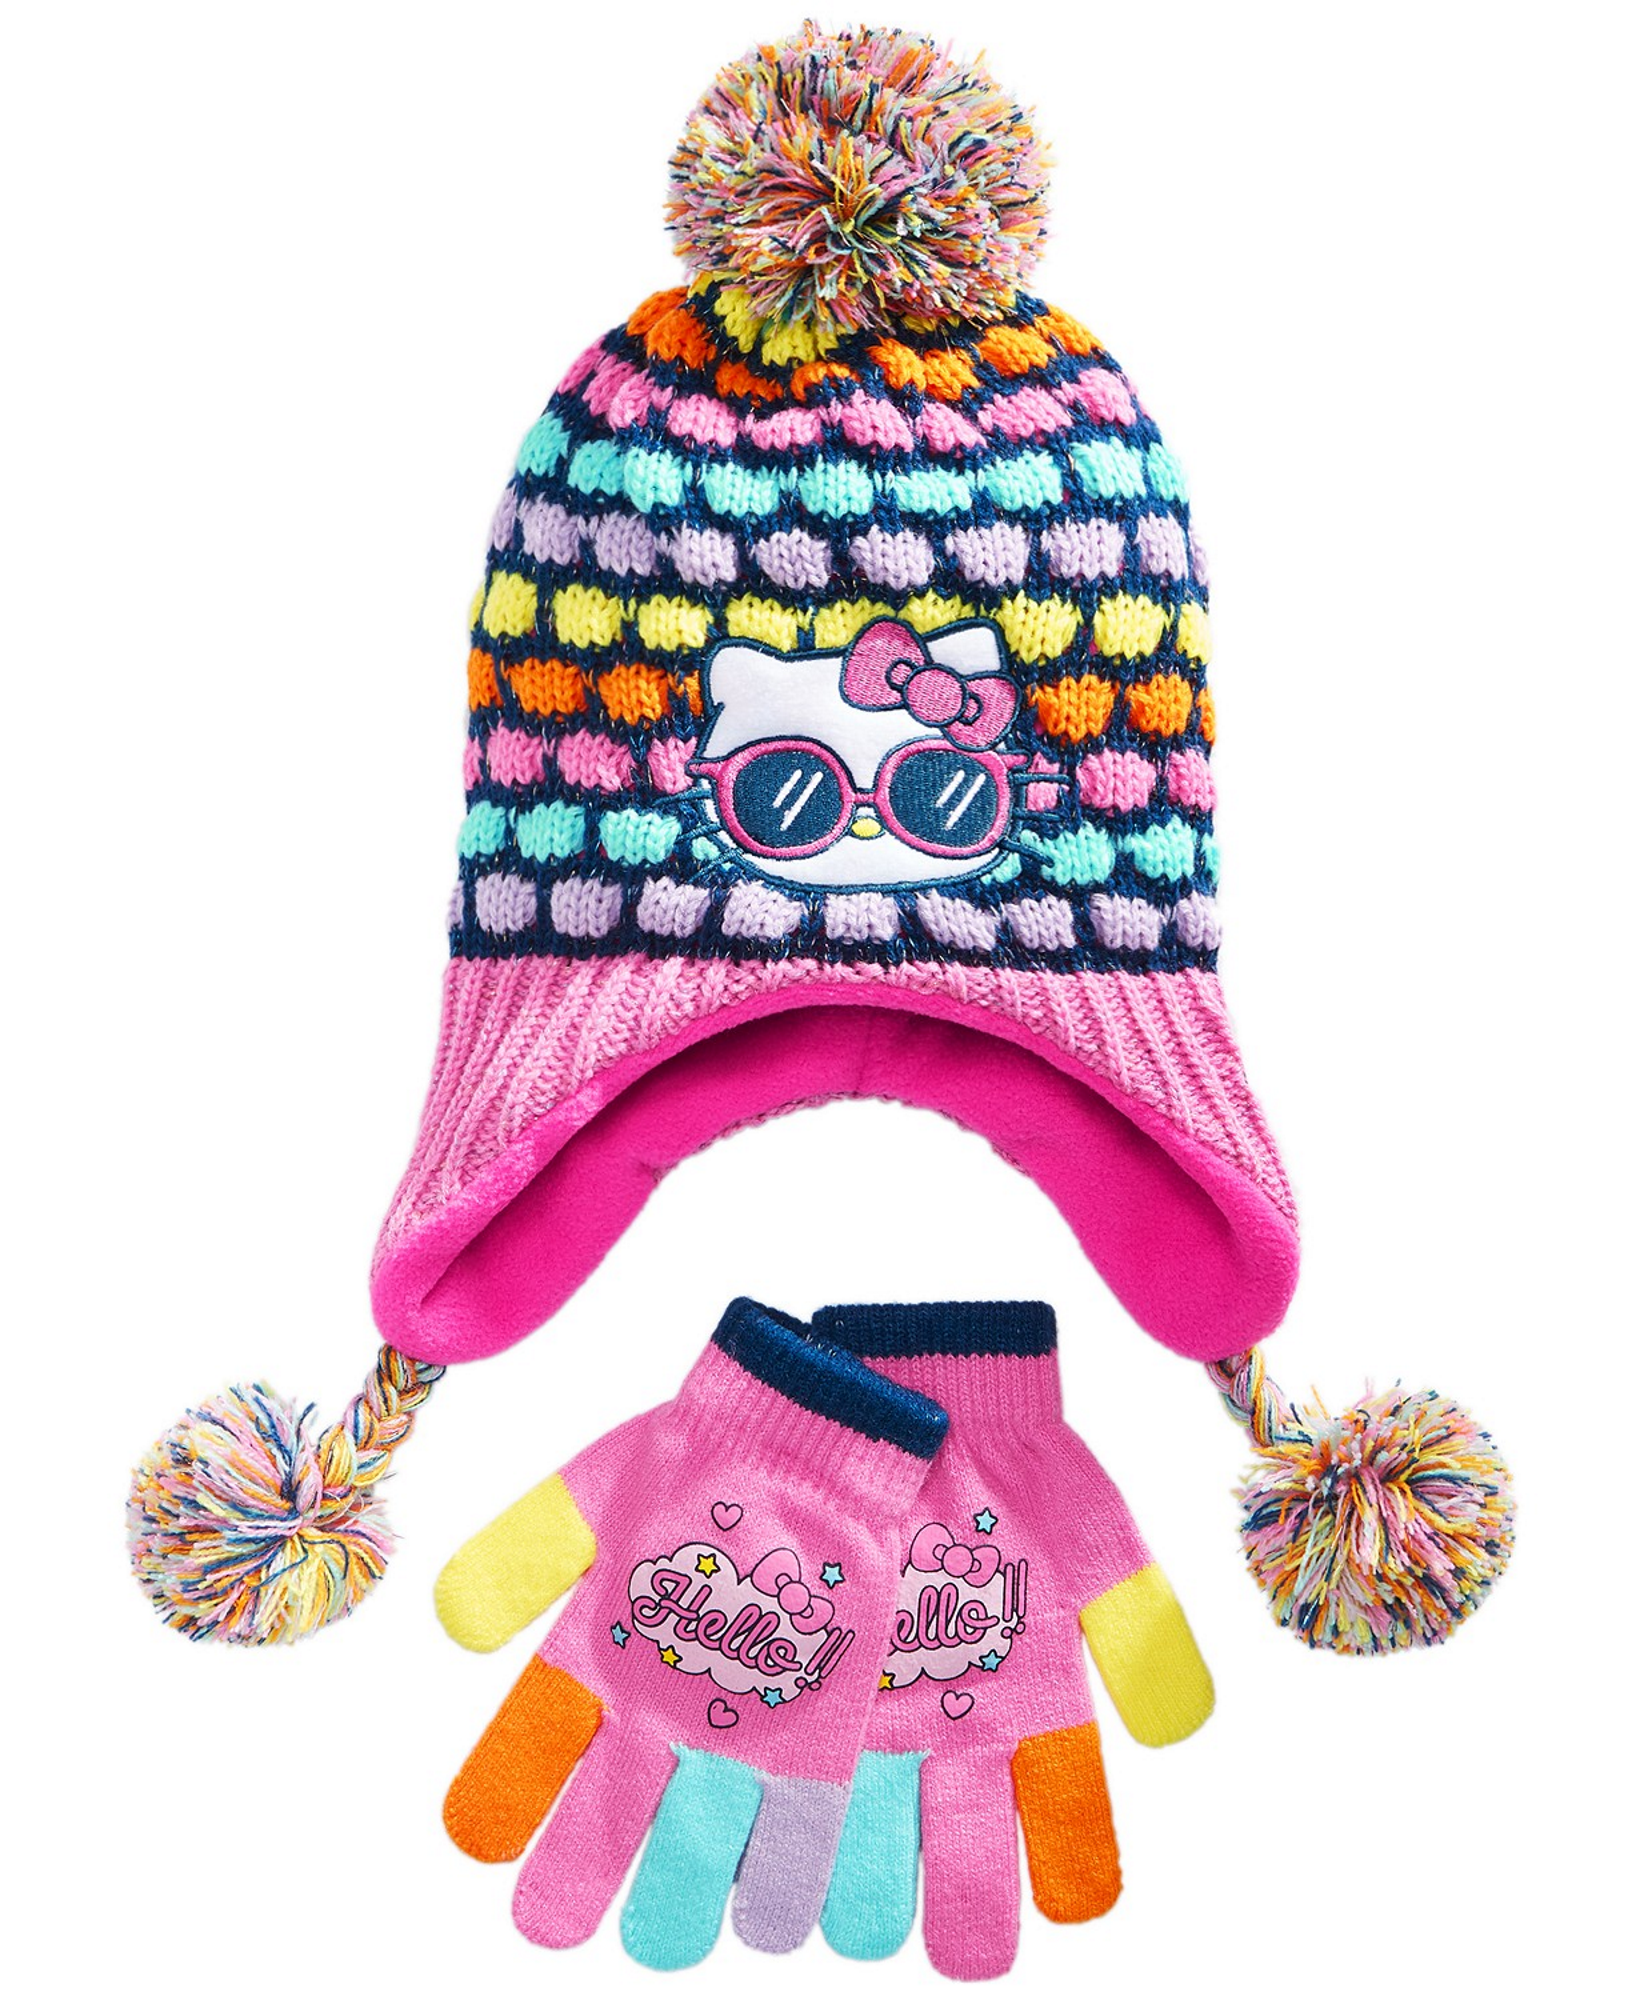 New Child's Knit Hat/Gloves Set Hot Pink BIG EYES KITTY CAT FACE Choose ONE 